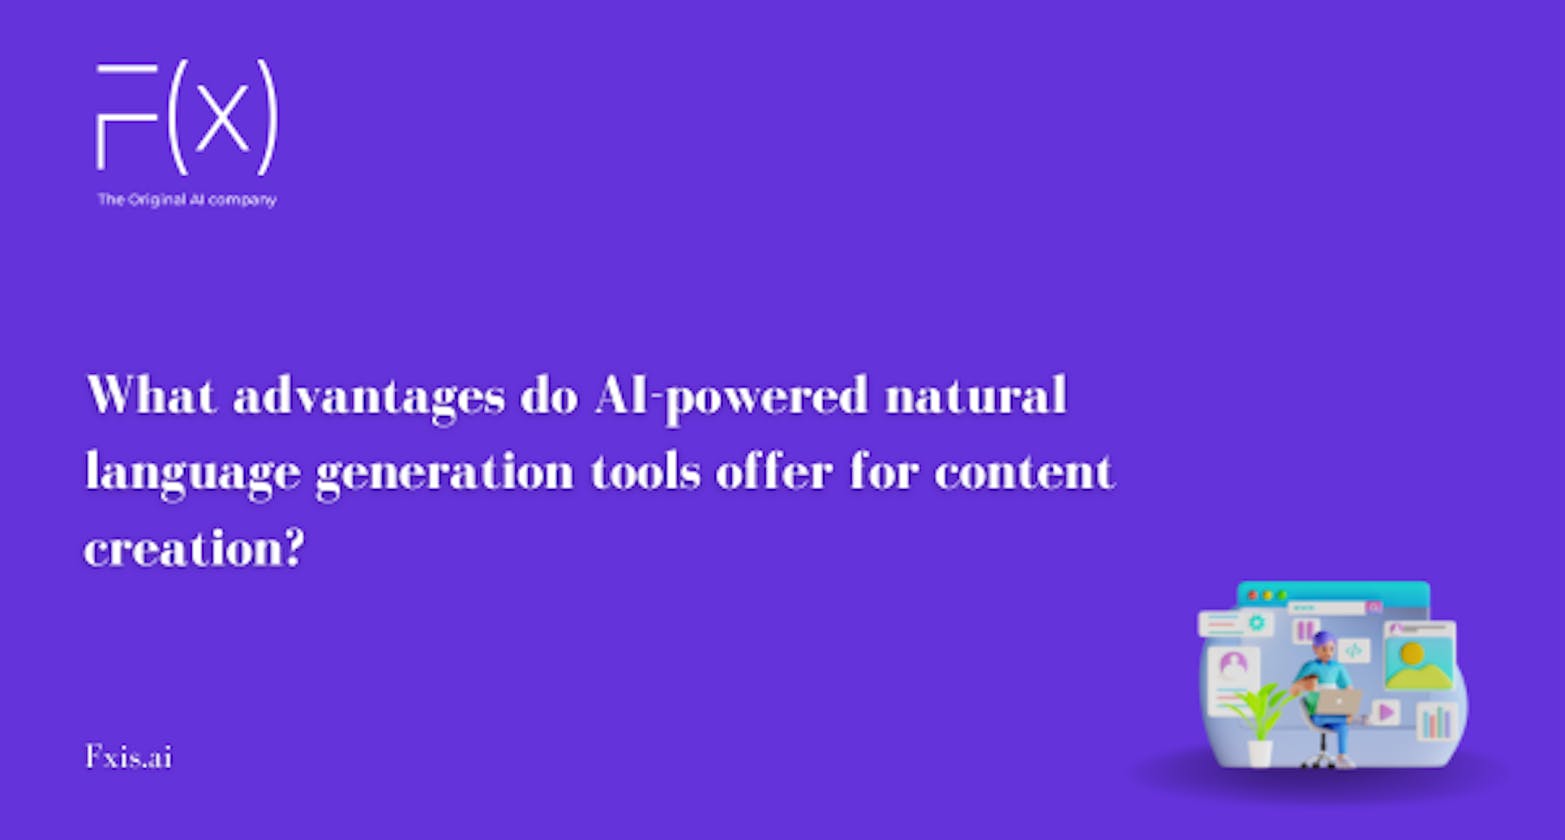 What advantages do AI-powered natural language generation tools offer for content creation?